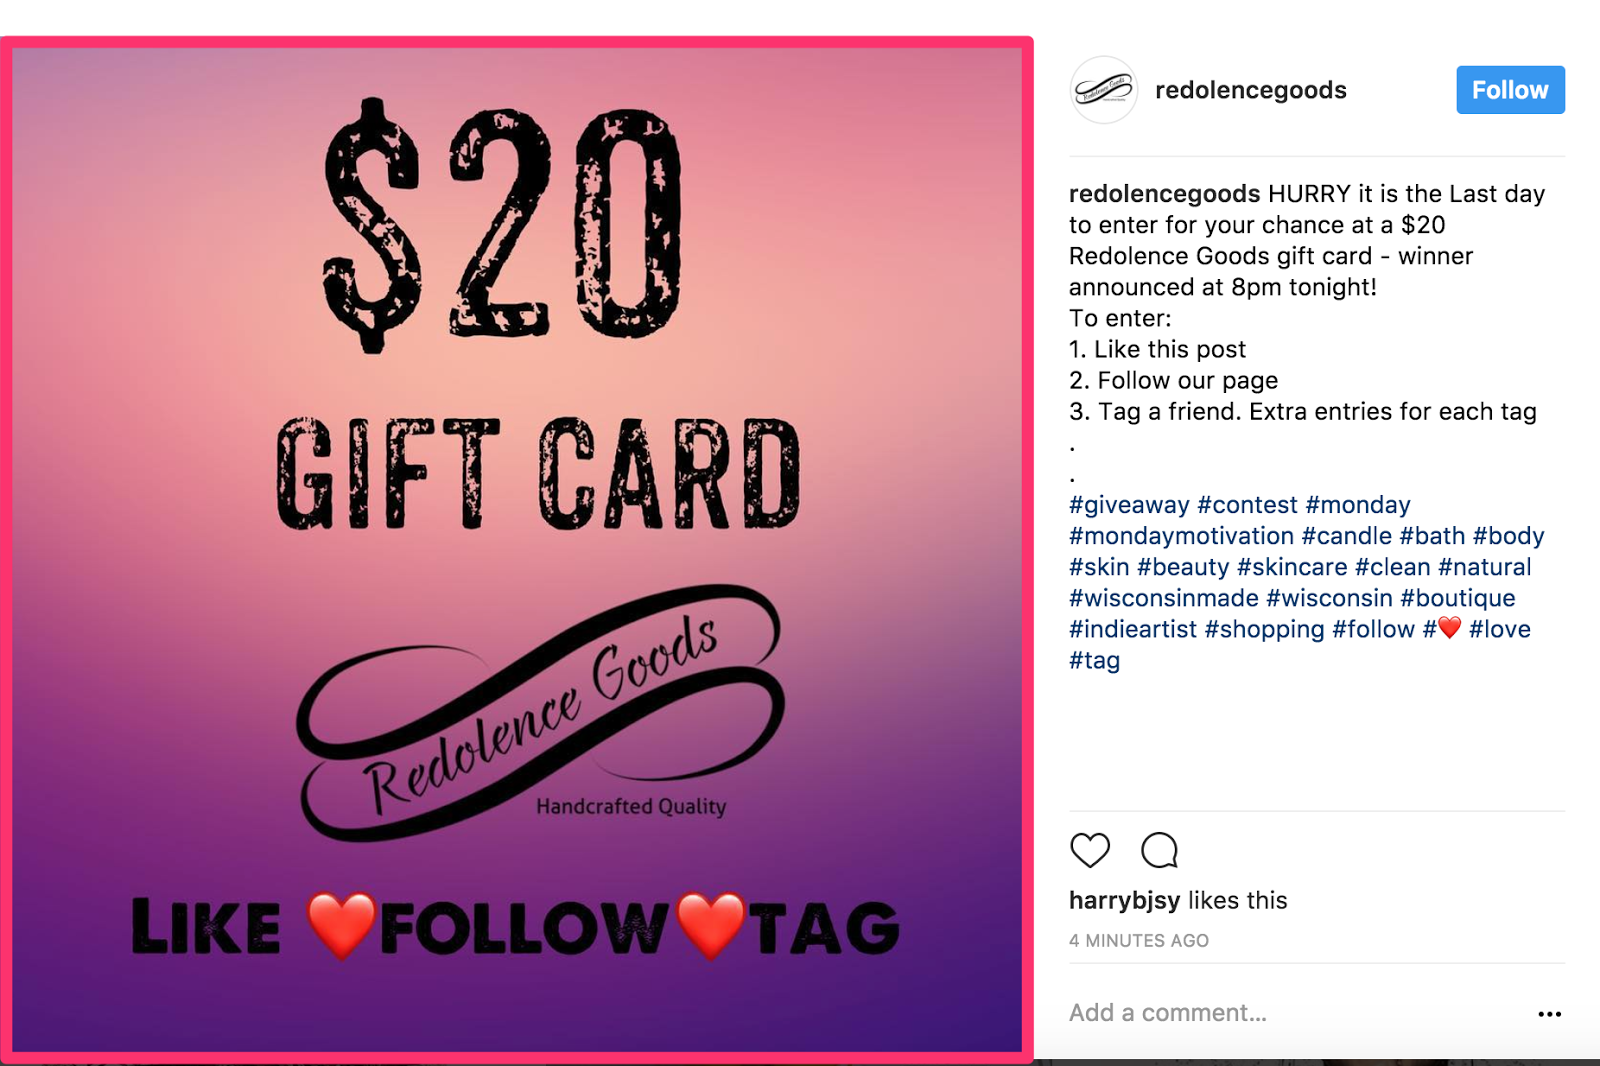 instagram contest ideas - custom image for giveaway posts